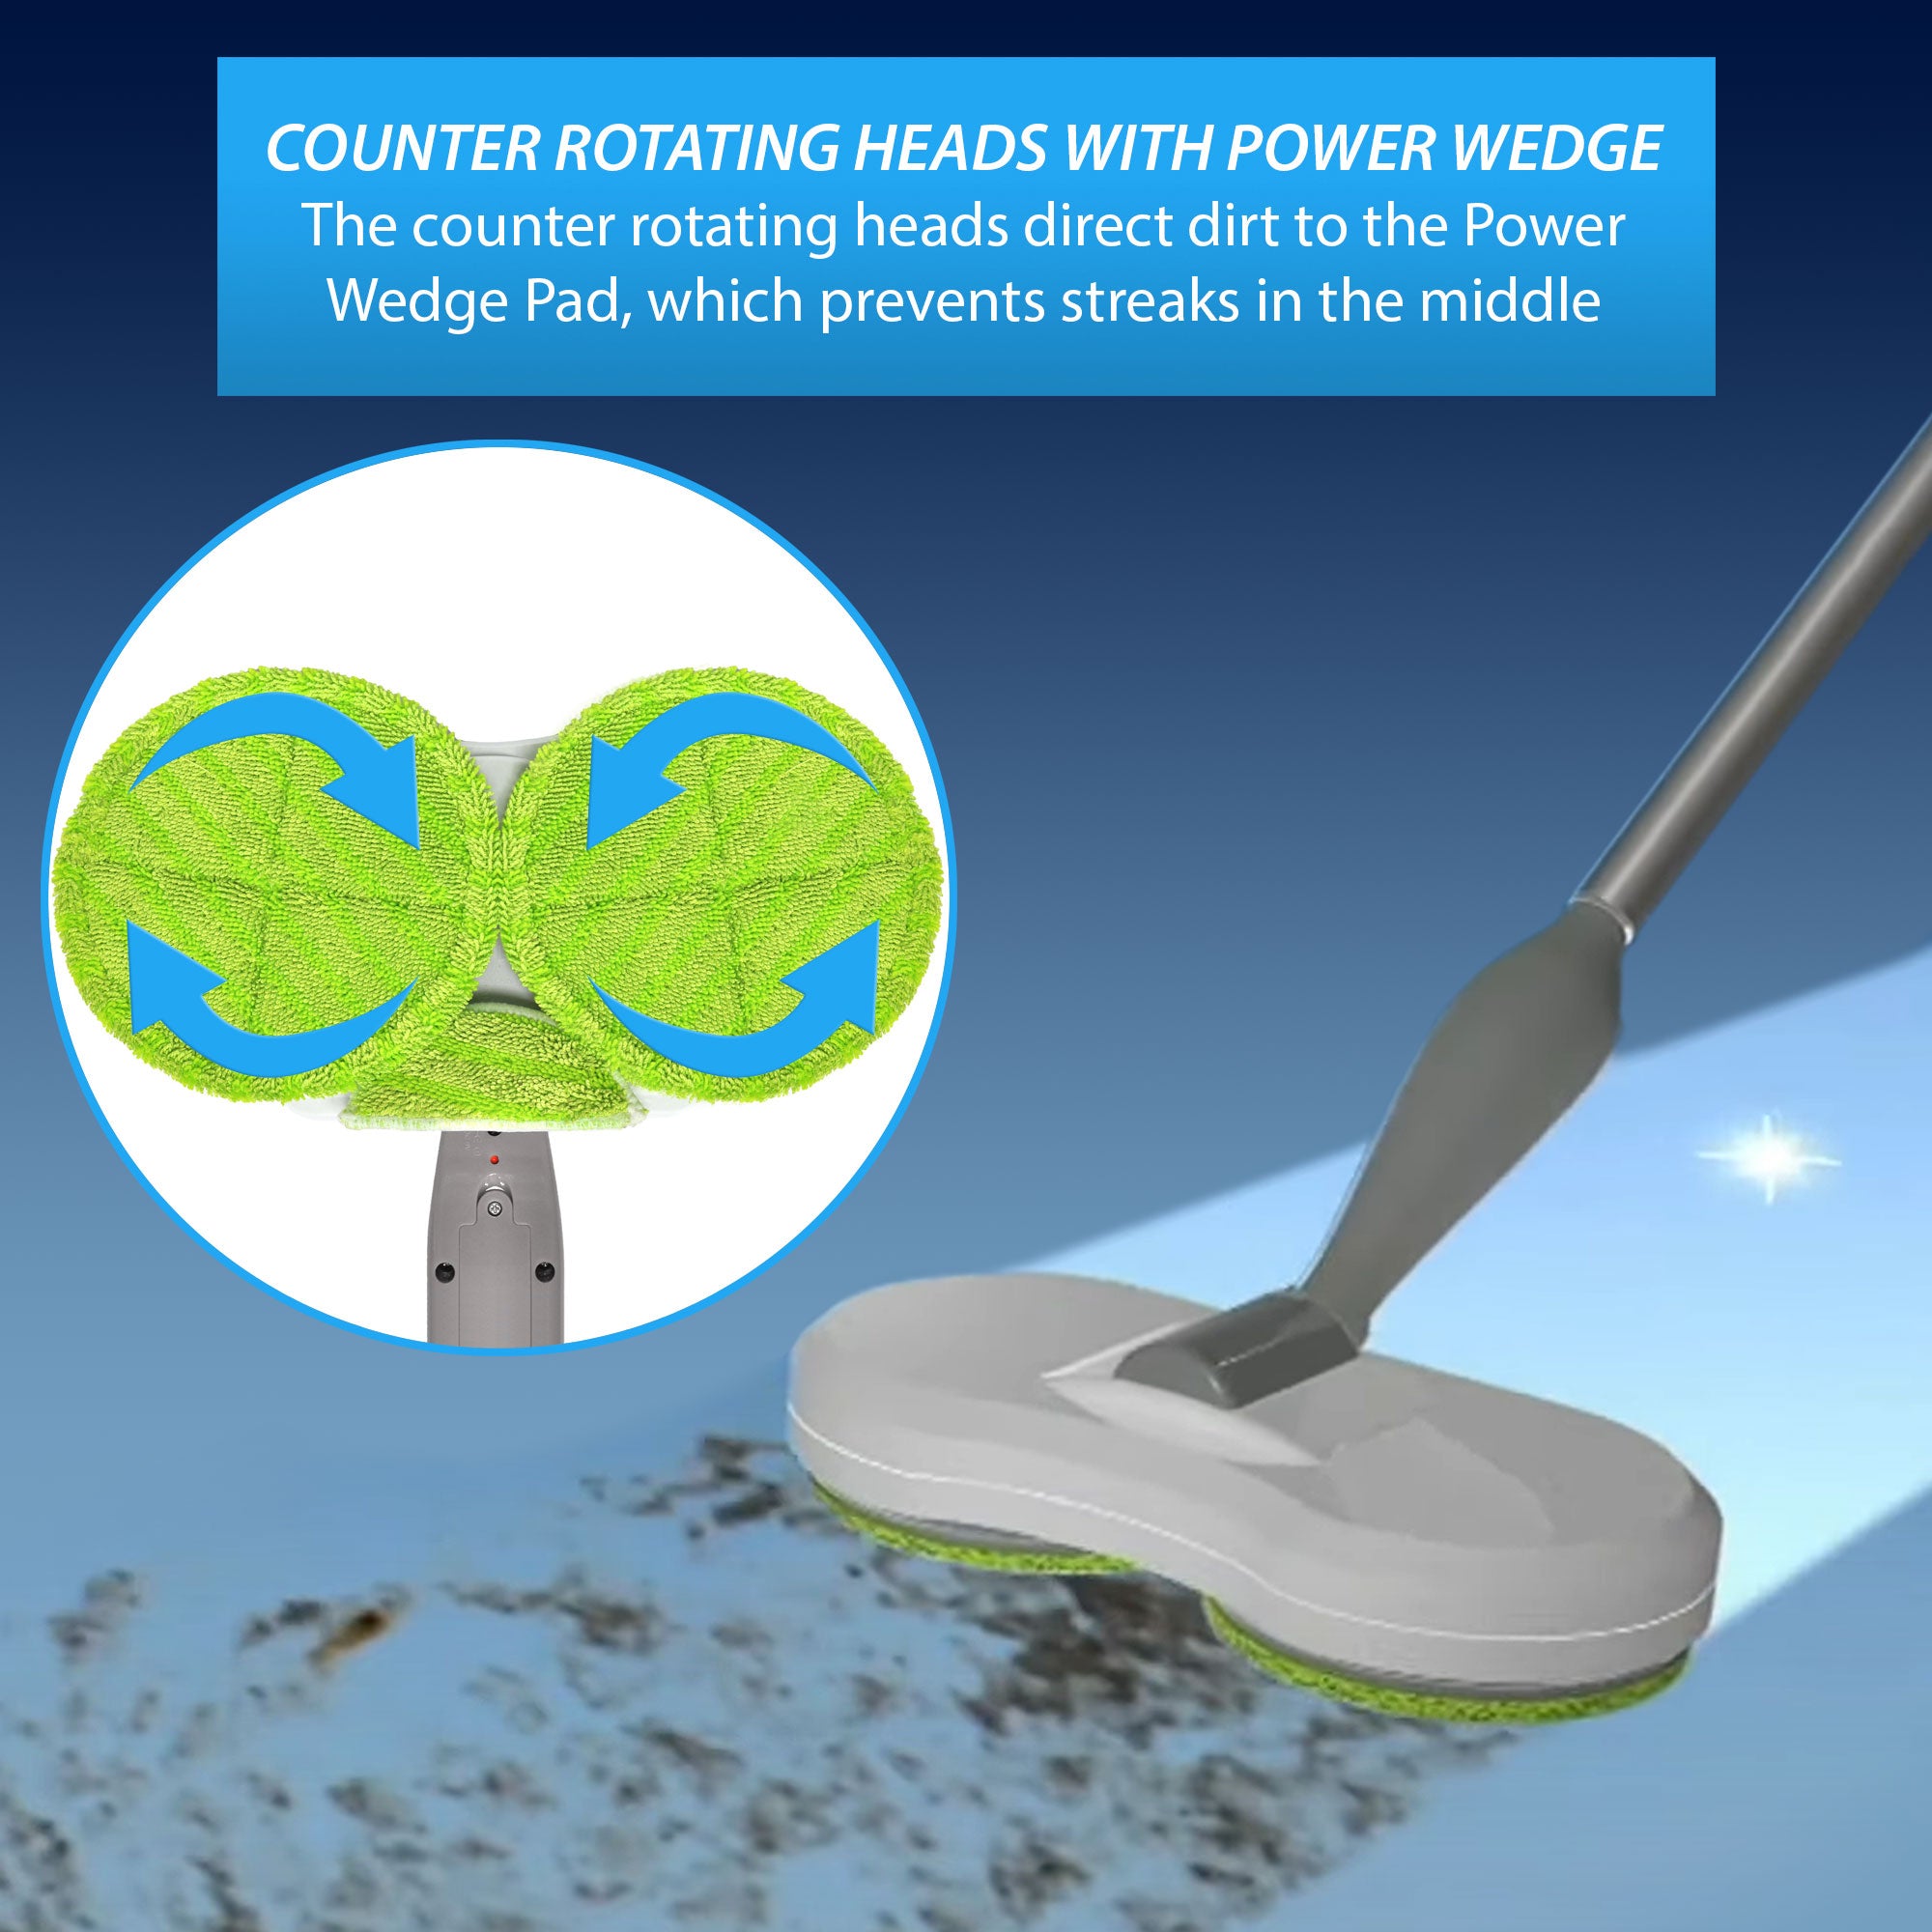 https://cdn.shopify.com/s/files/1/0460/8101/5973/products/hover-scrubber-deluxe-power-wedge_5000x.jpg?v=1660143834